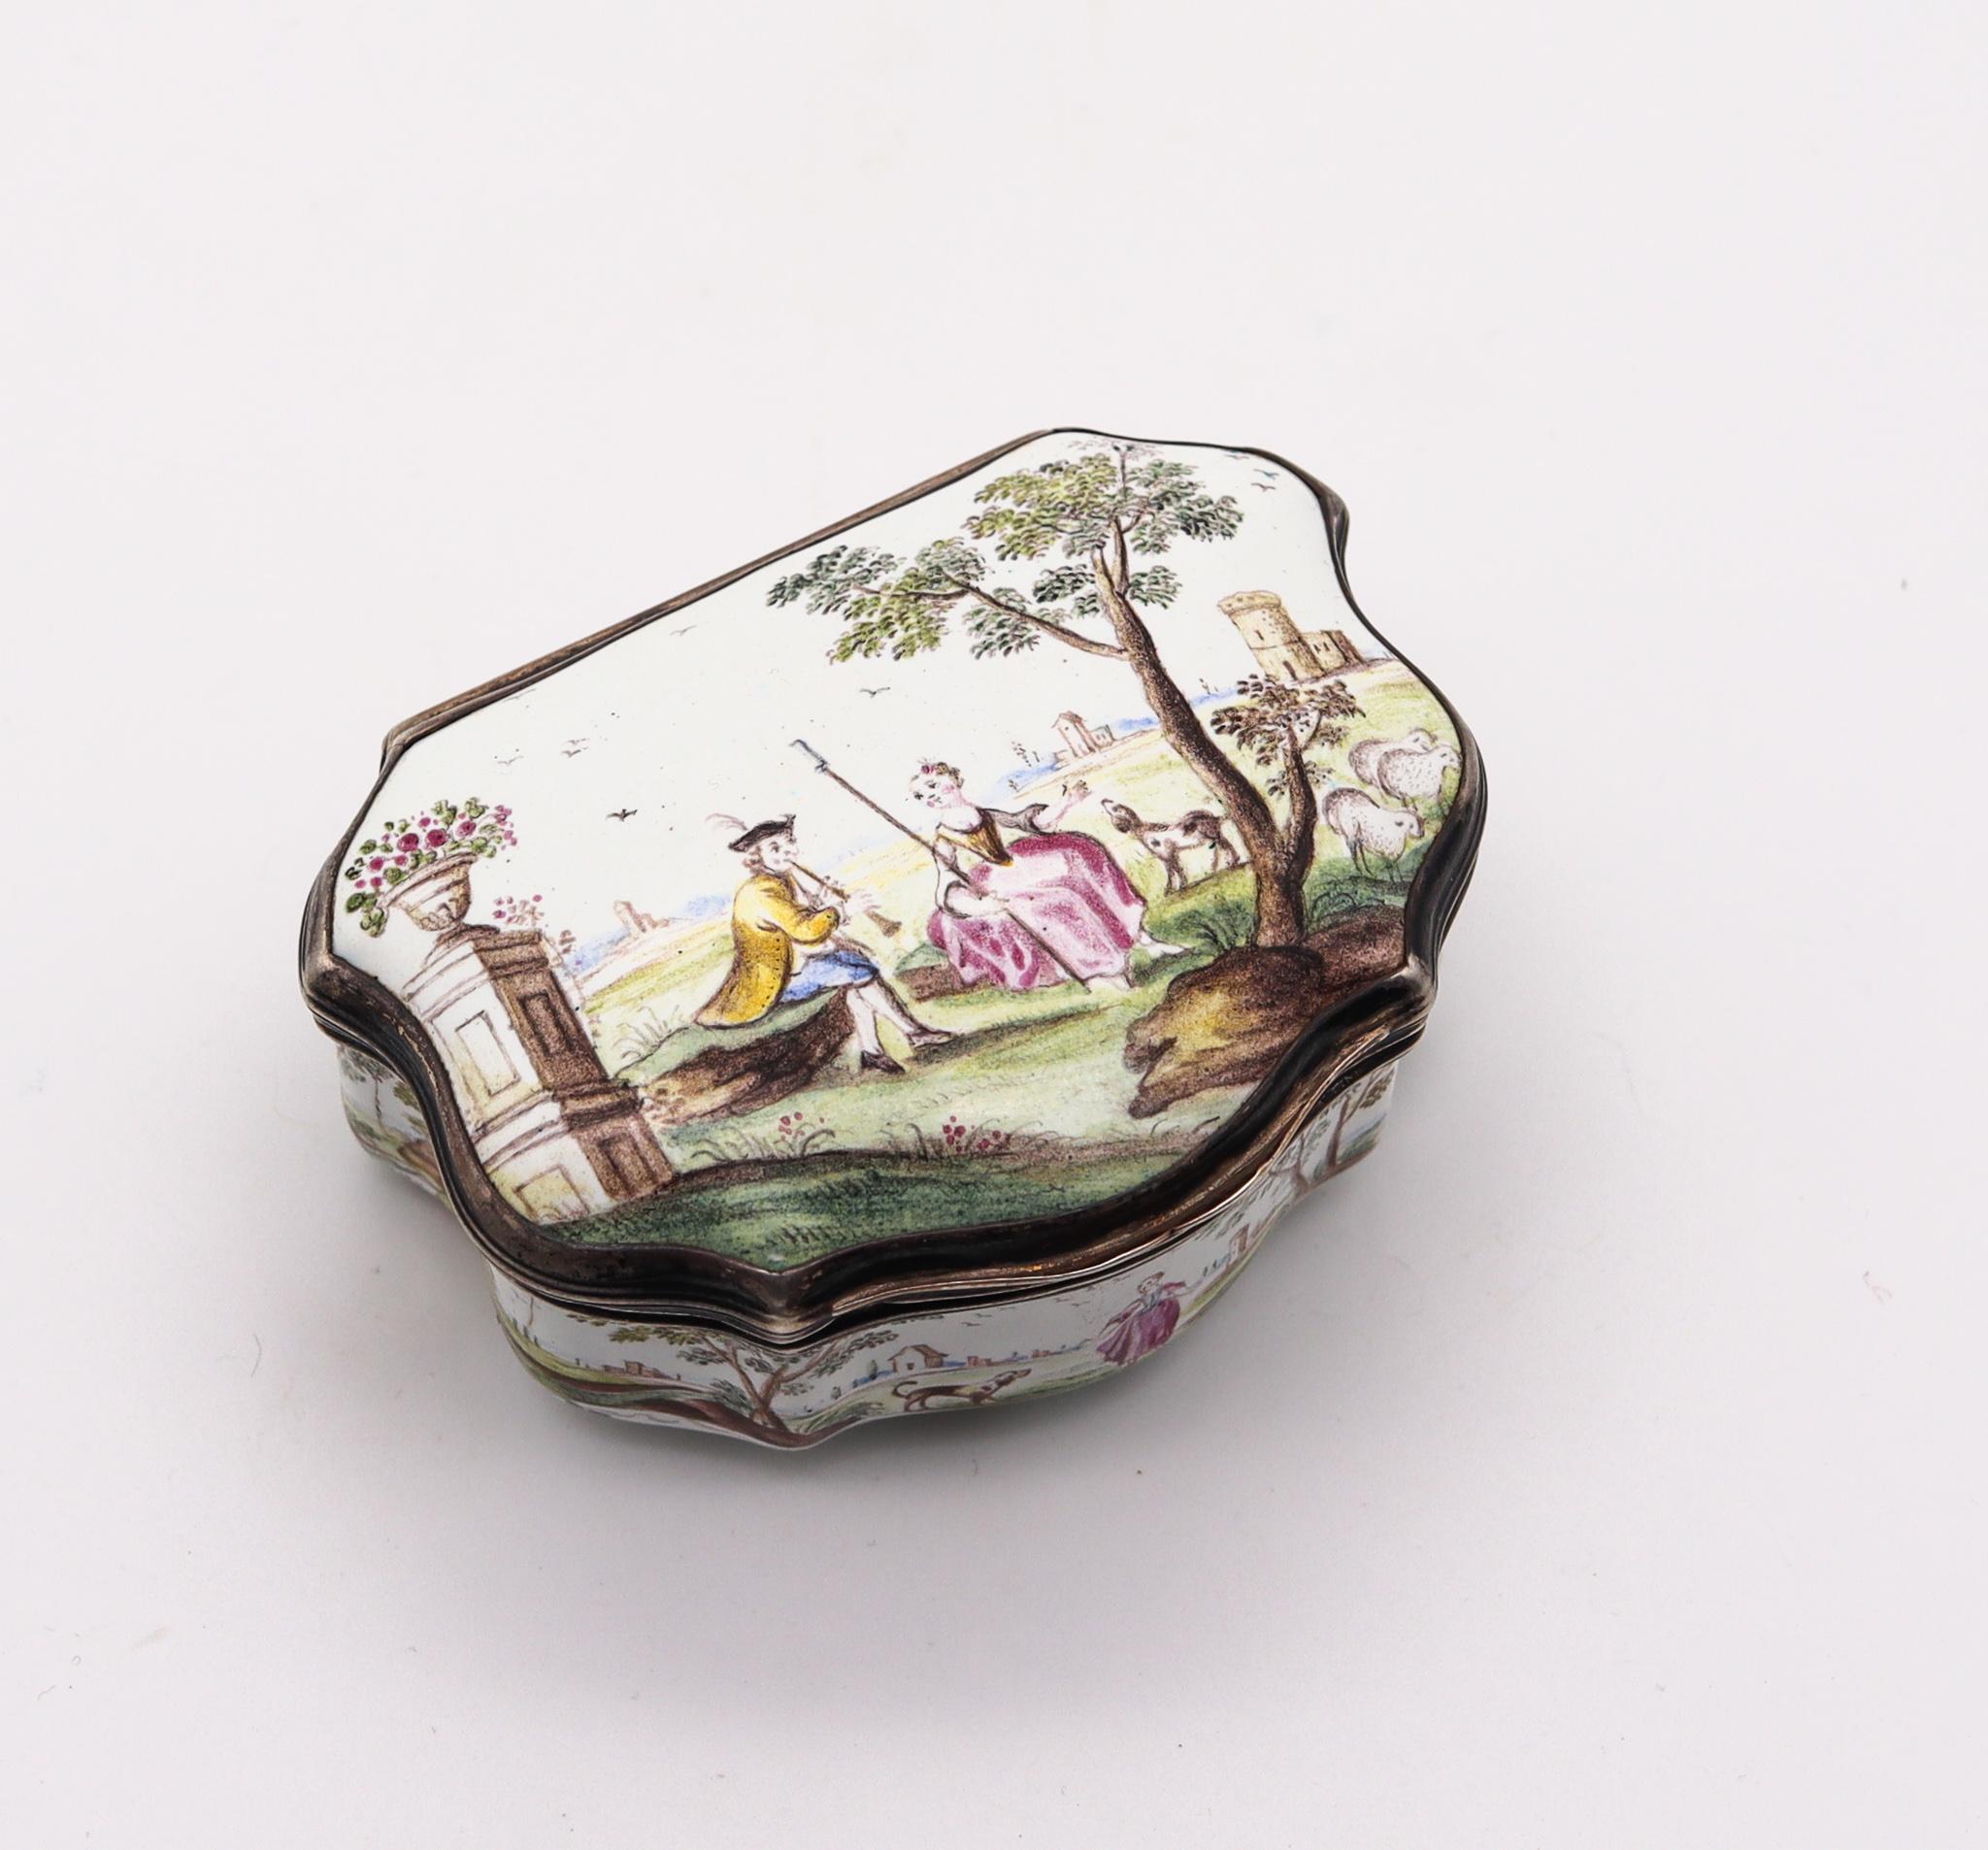 Georgian Battersea enamel box from the 18th century.

A beautiful fine antique English Battersea Bilston table snuff box created in the district of Battersea in London England during the early Georgian period, back in the 1770. This rare box was